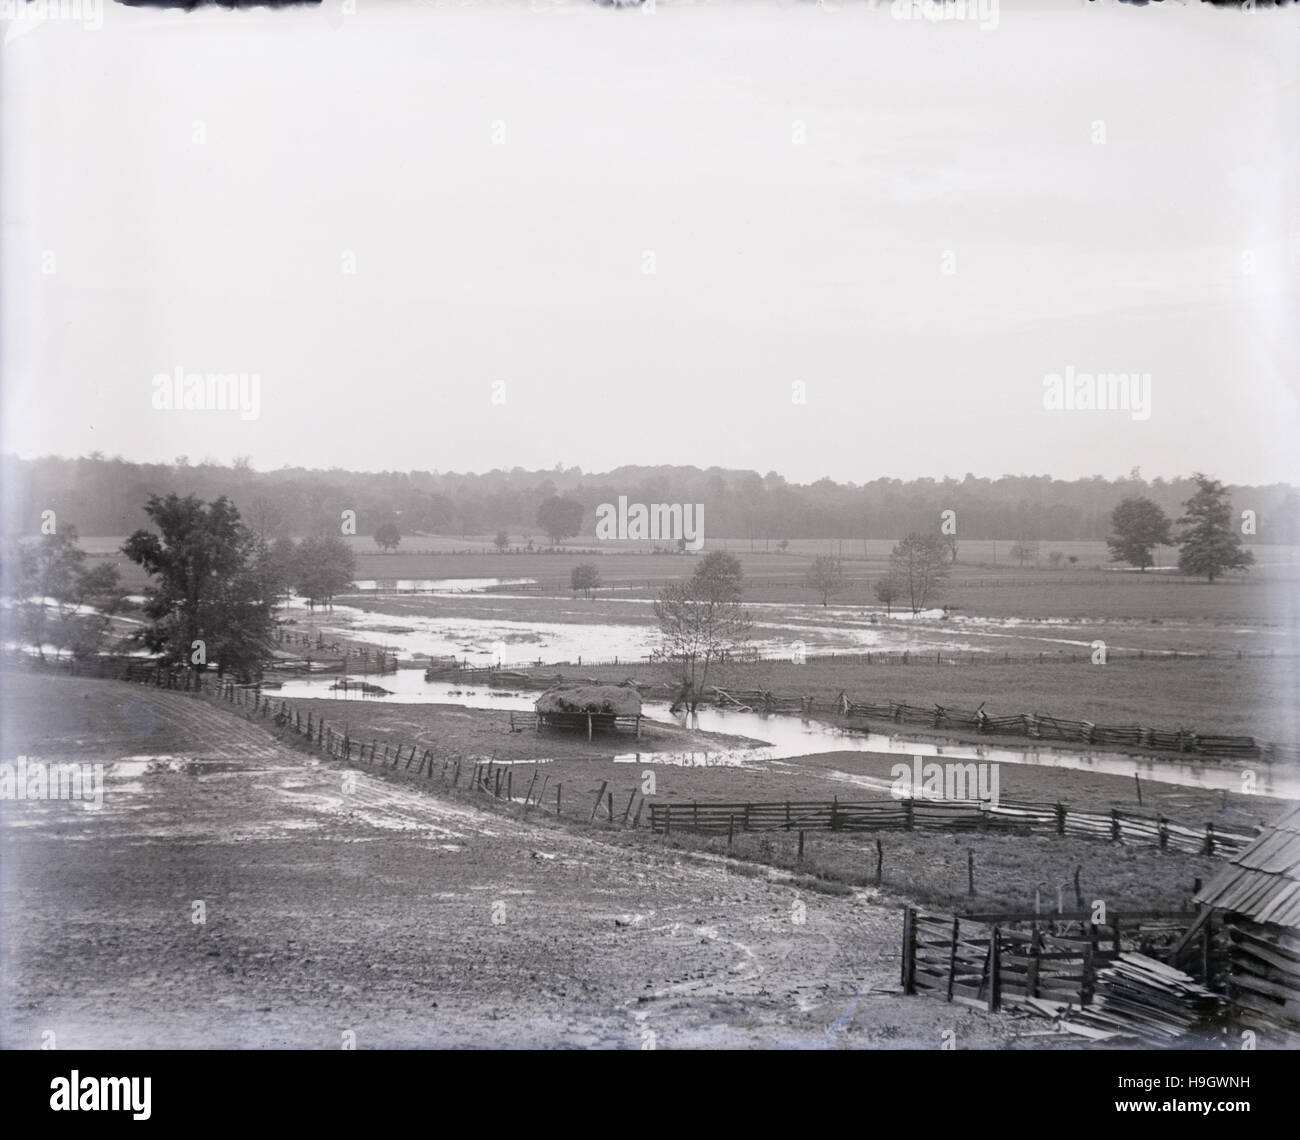 Antique c1900 photograph, flooded fields and pastureland. Location unknown, probably midwest (Indiana or Ohio) USA. SOURCE: ORIGINAL PHOTOGRAPHIC NEGATIVE. Stock Photo